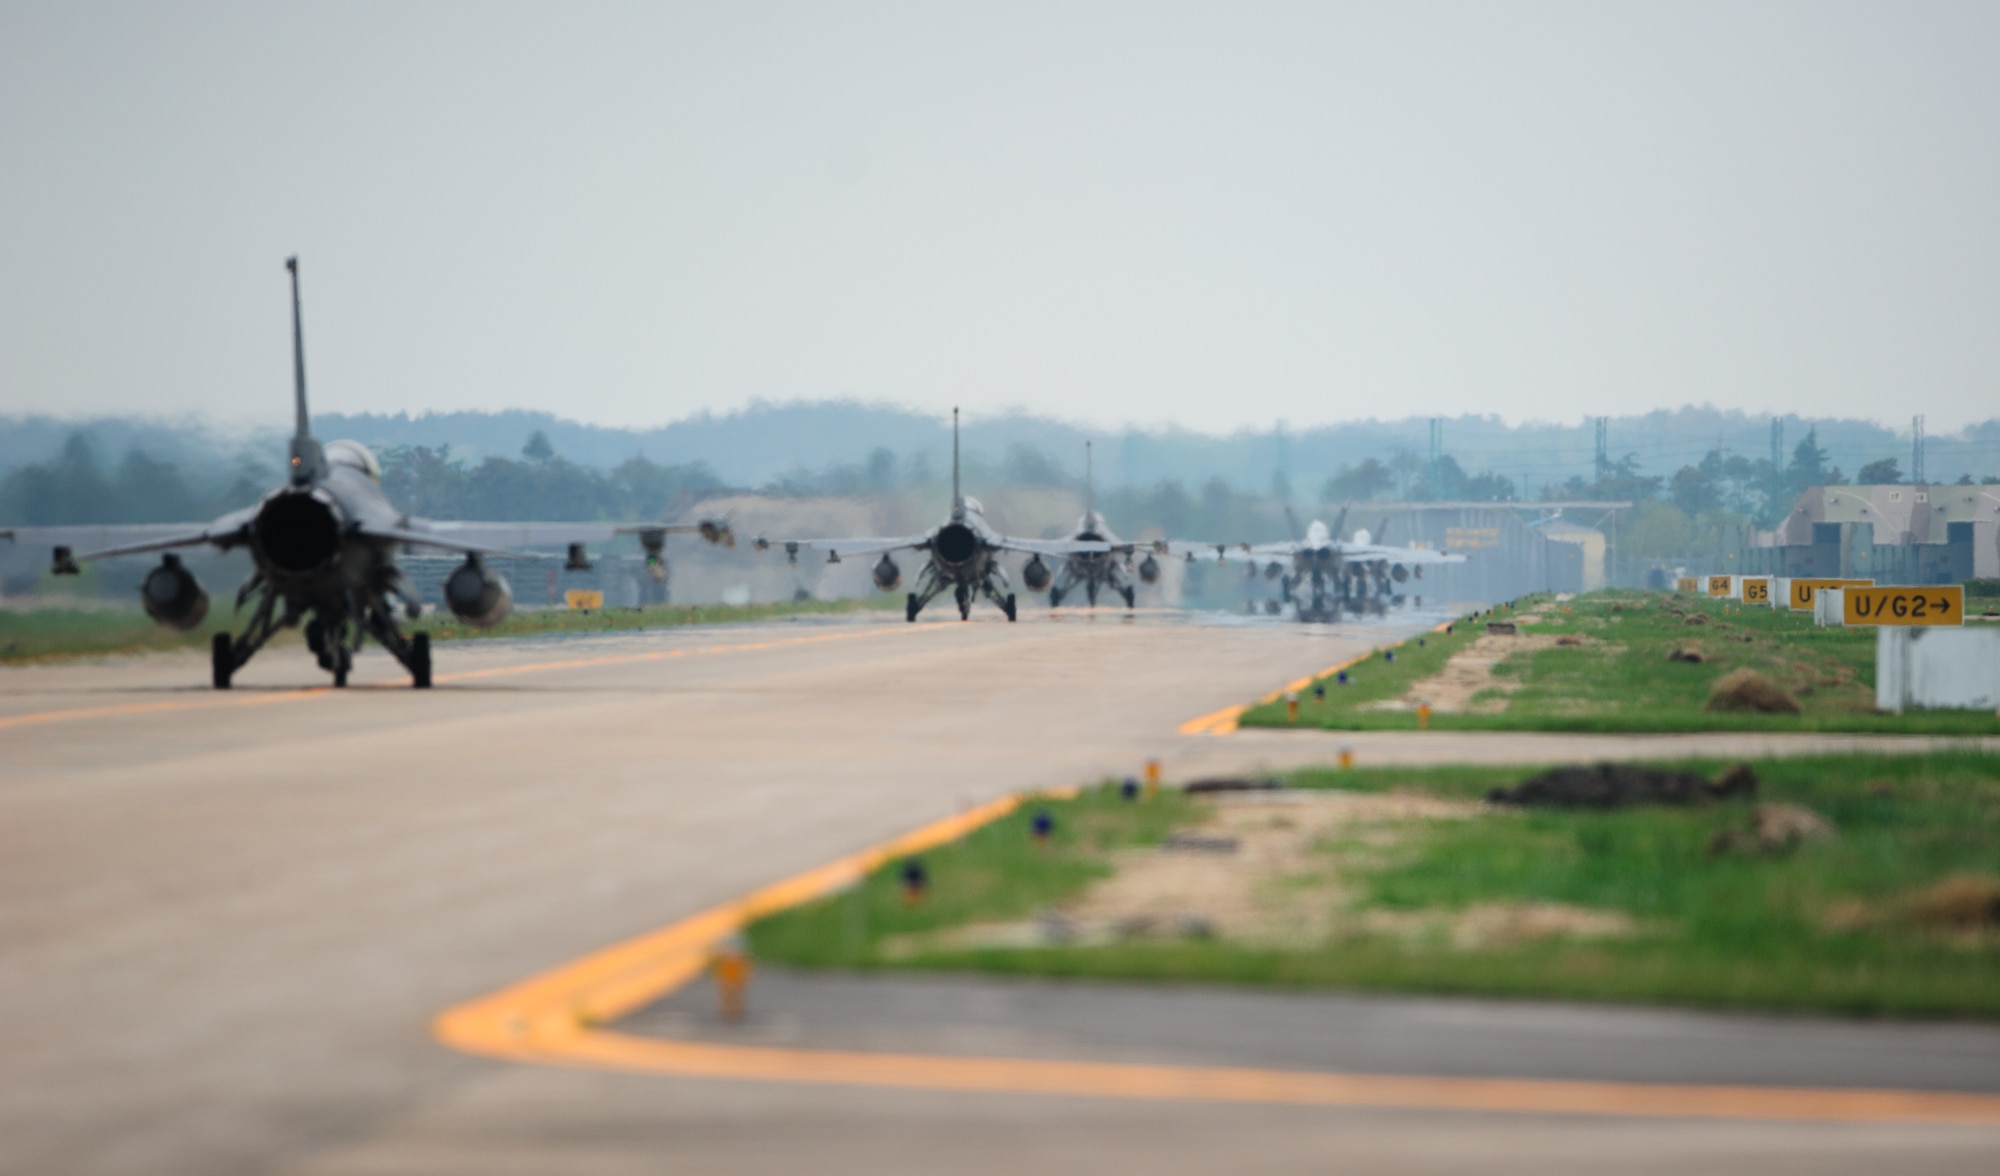 U.S. Navy, Marine Corps and Air Force pilots taxi towards the runway to begin a joint sortie during the 12th Max Thunder April 22, 2014, at Gwangju Air Base, Republic of Korea. The two-week exercise is the air component-led portion of Exercise Foal Eagle and trains both ROK and U.S. Airmen on aerial training. (U.S. Air Force photo by Senior Airman Armando A. Schwier-Morales)